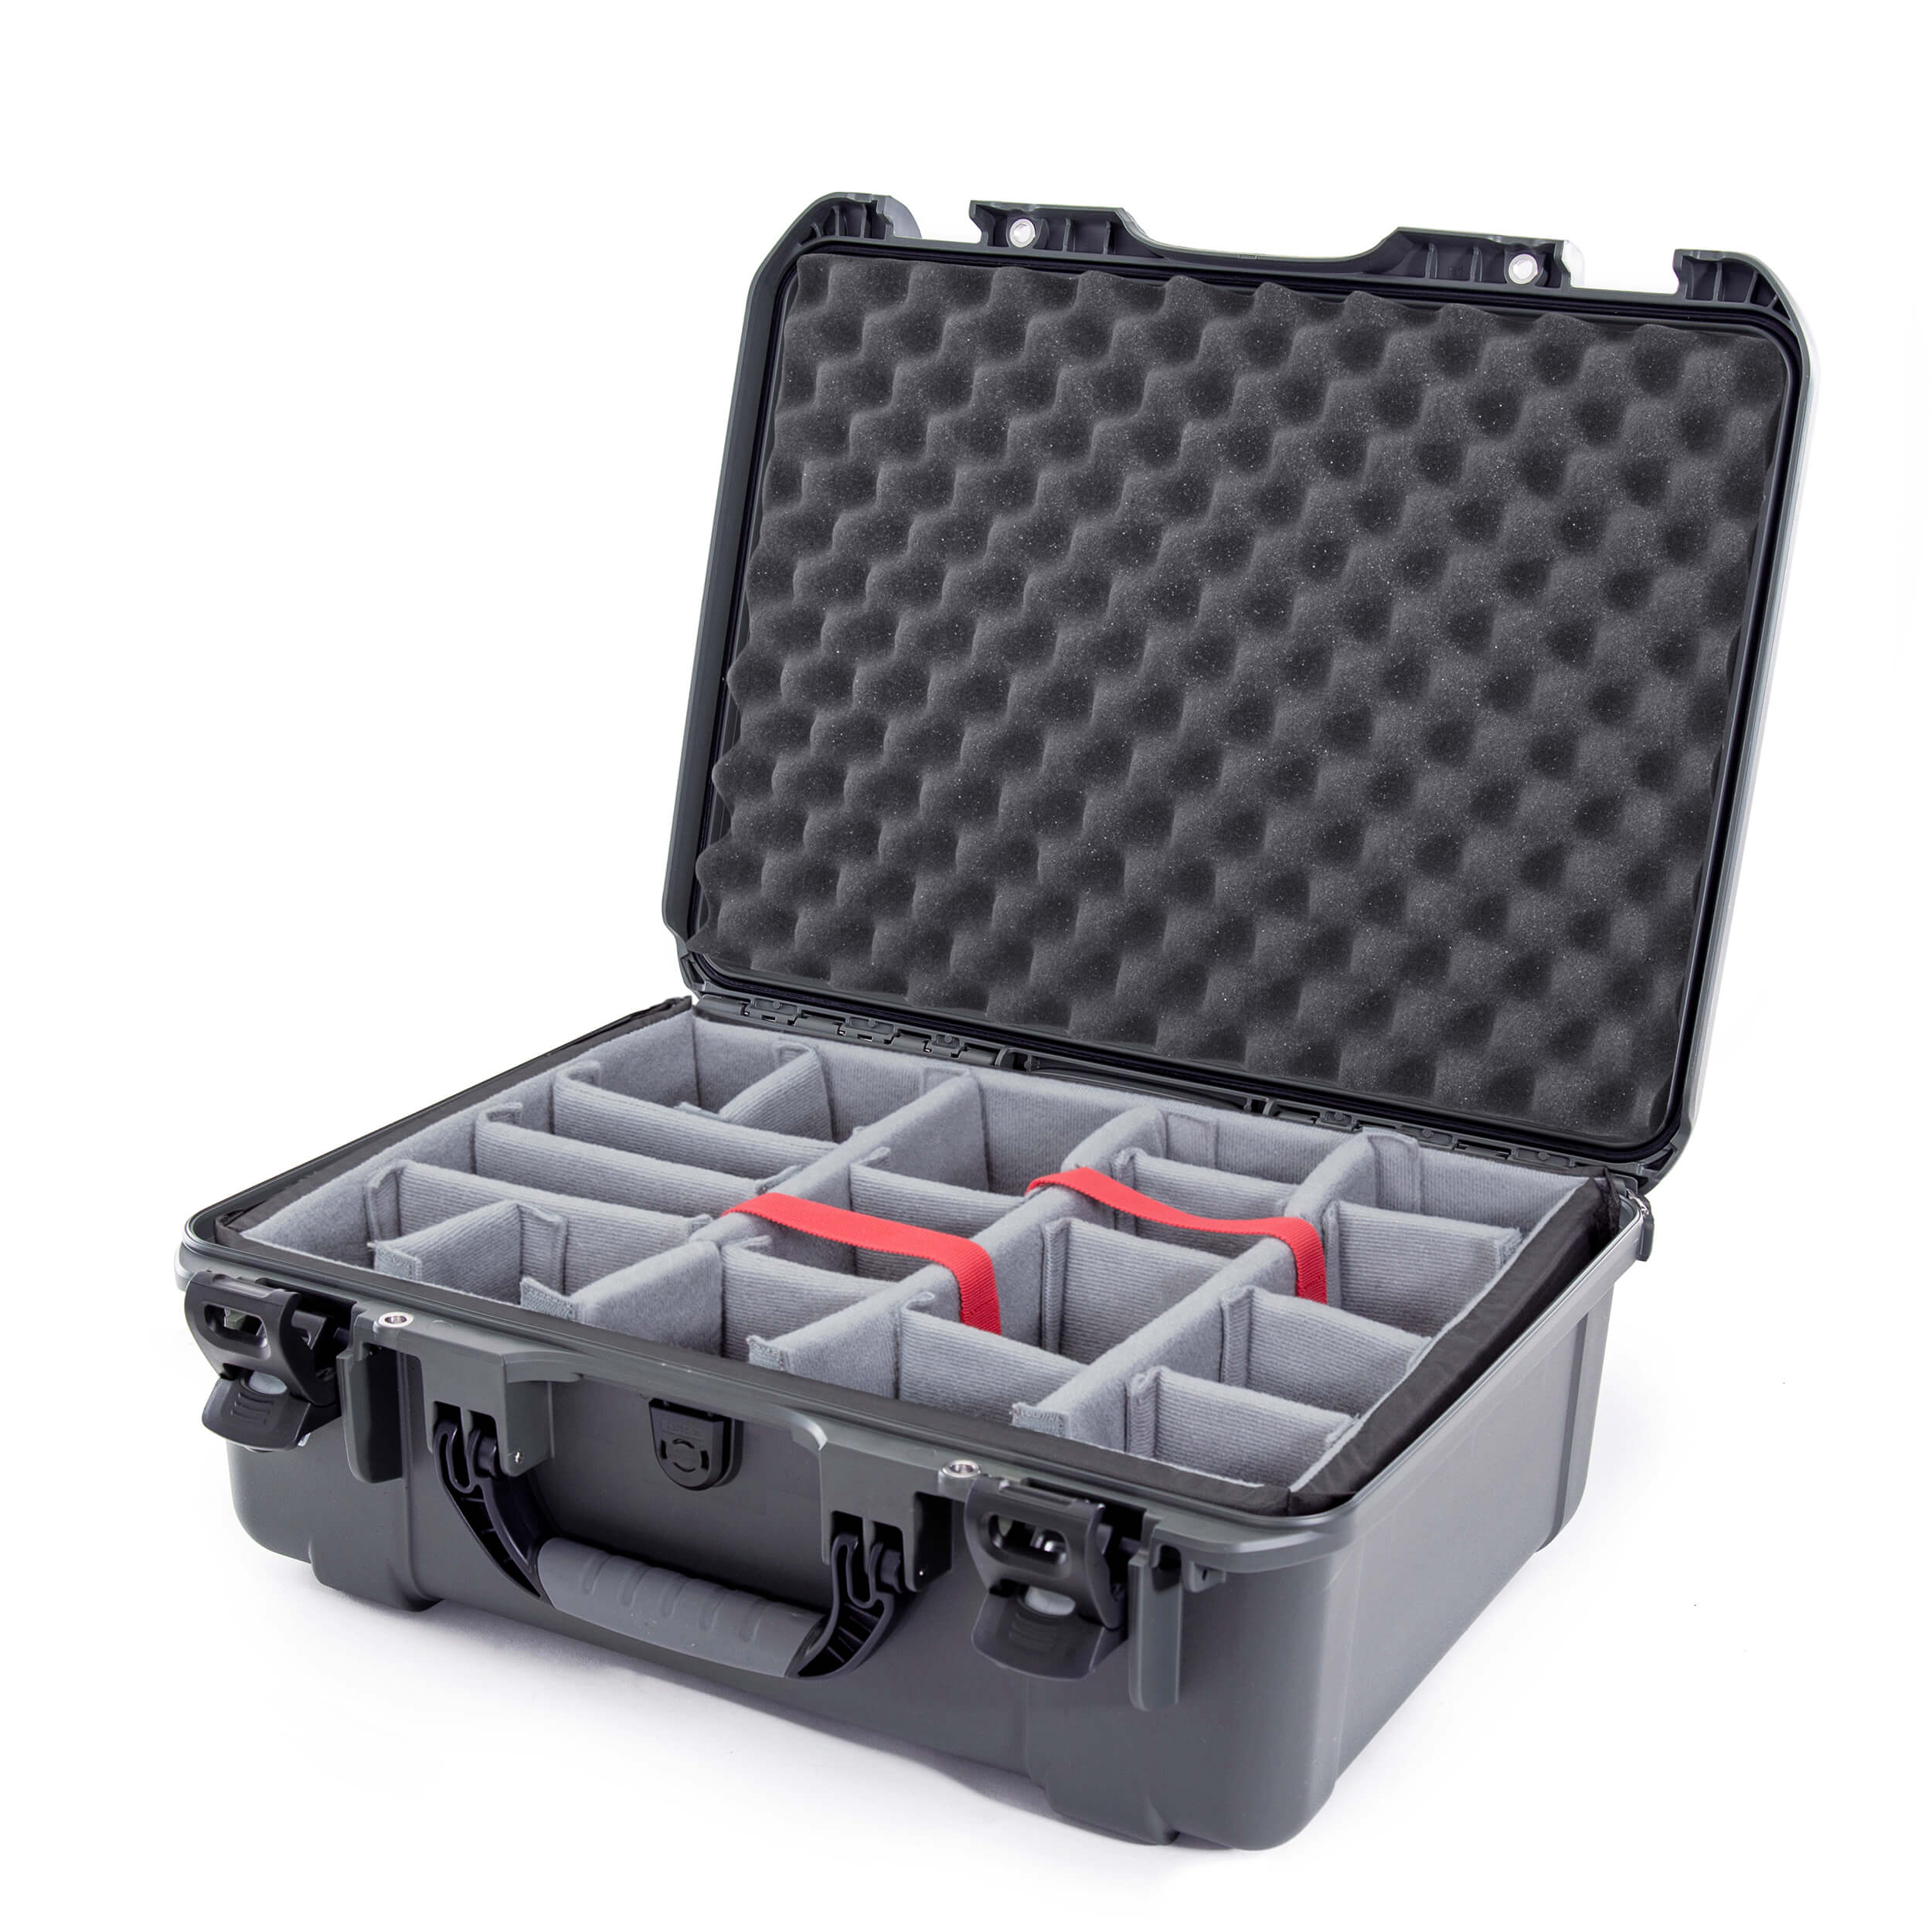 Condition 1 Heavy-Duty Protective Waterproof Hard Case Portable Storage Box  with Customizable Foam, Camera, Tool, Hunting, Military Watertight Case